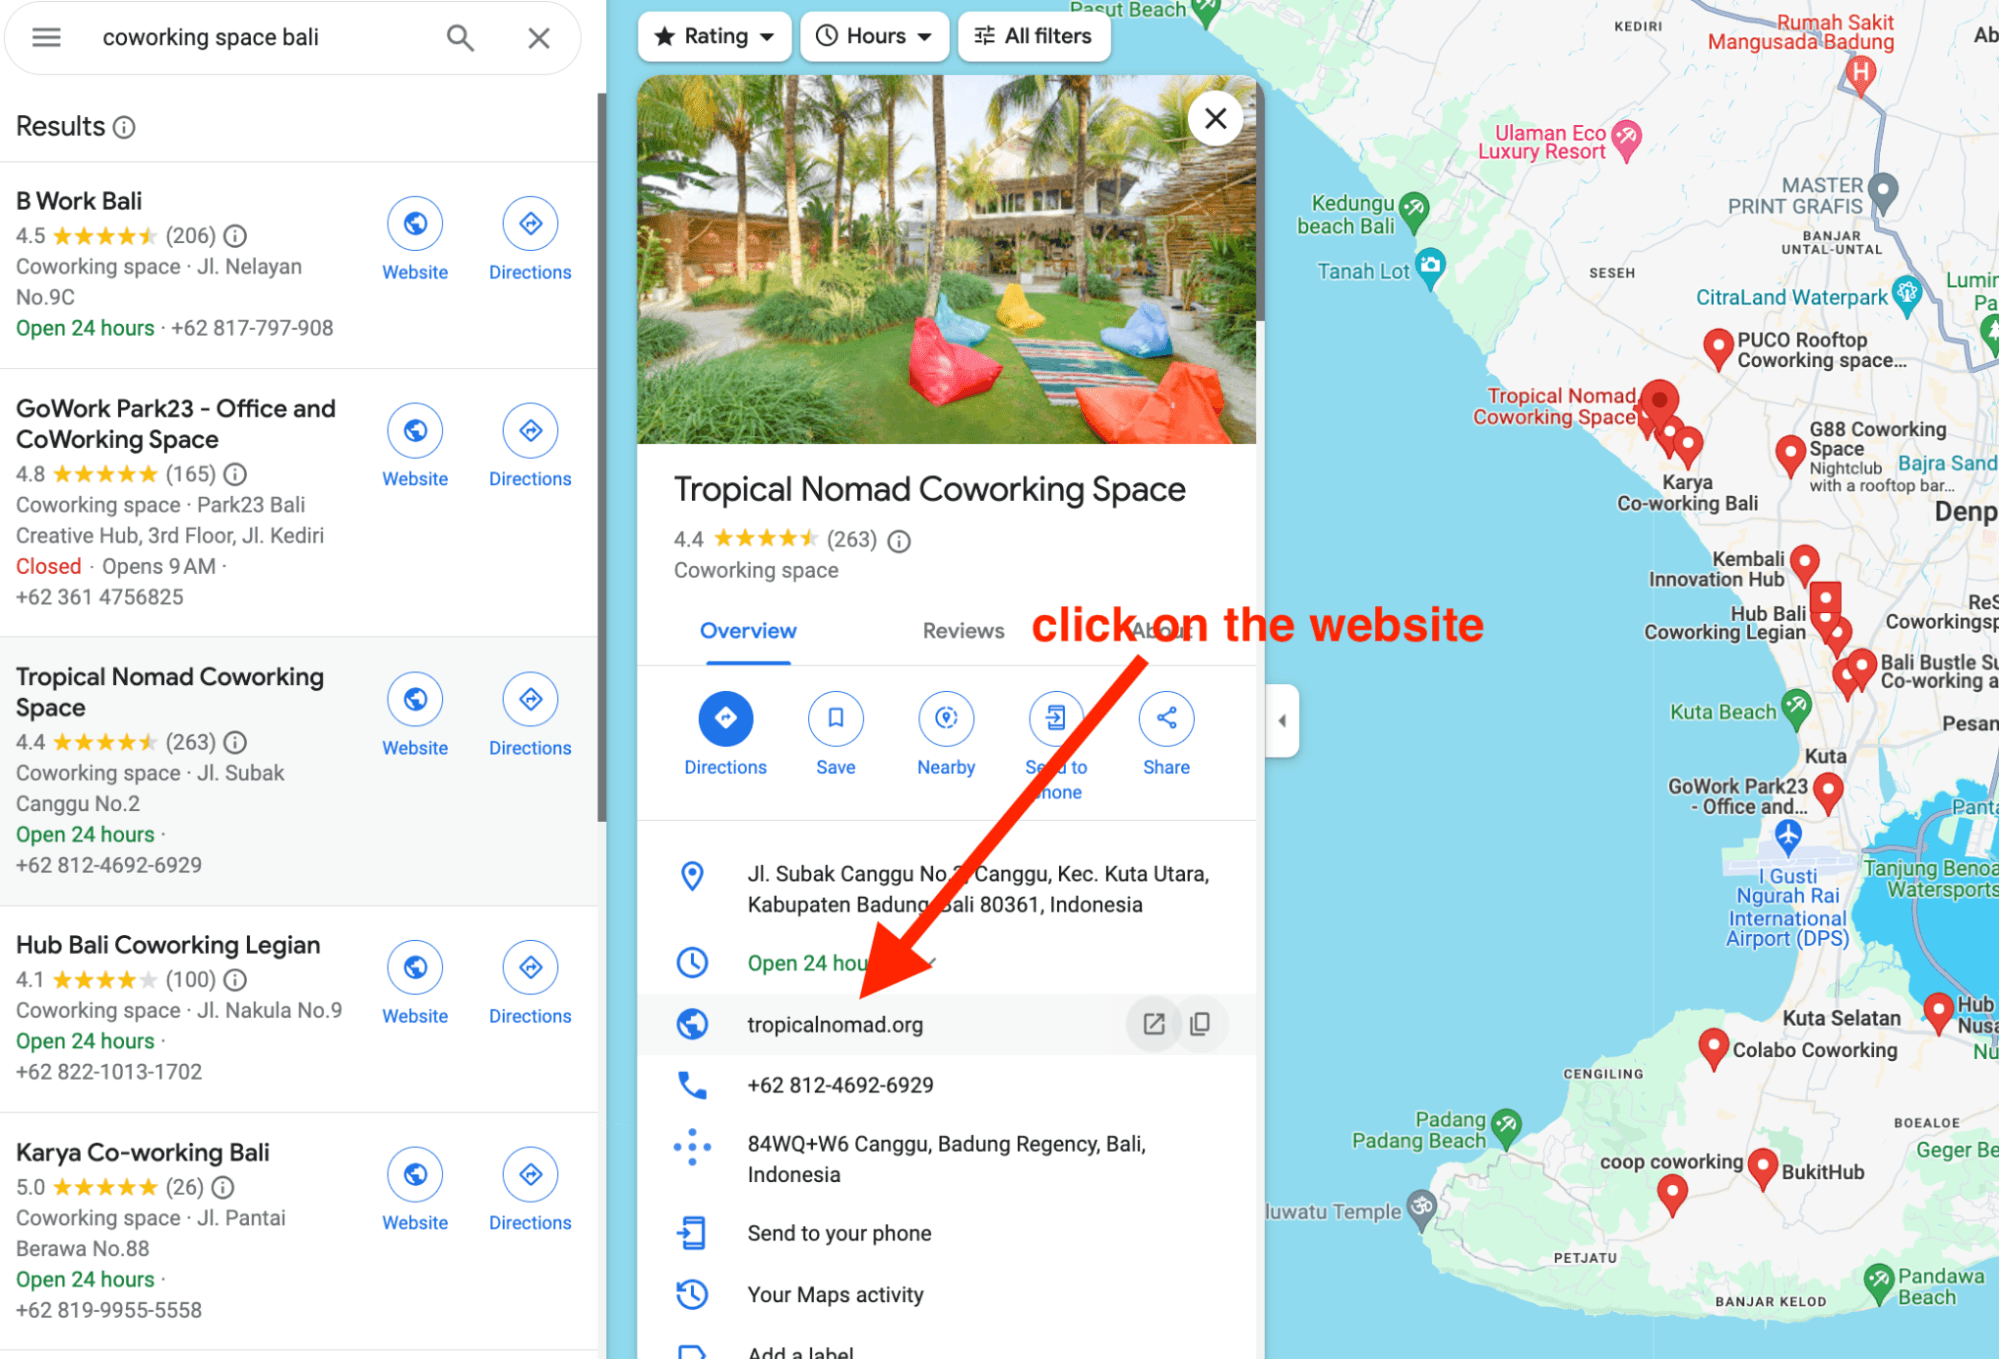 click on website from google maps - image25.png